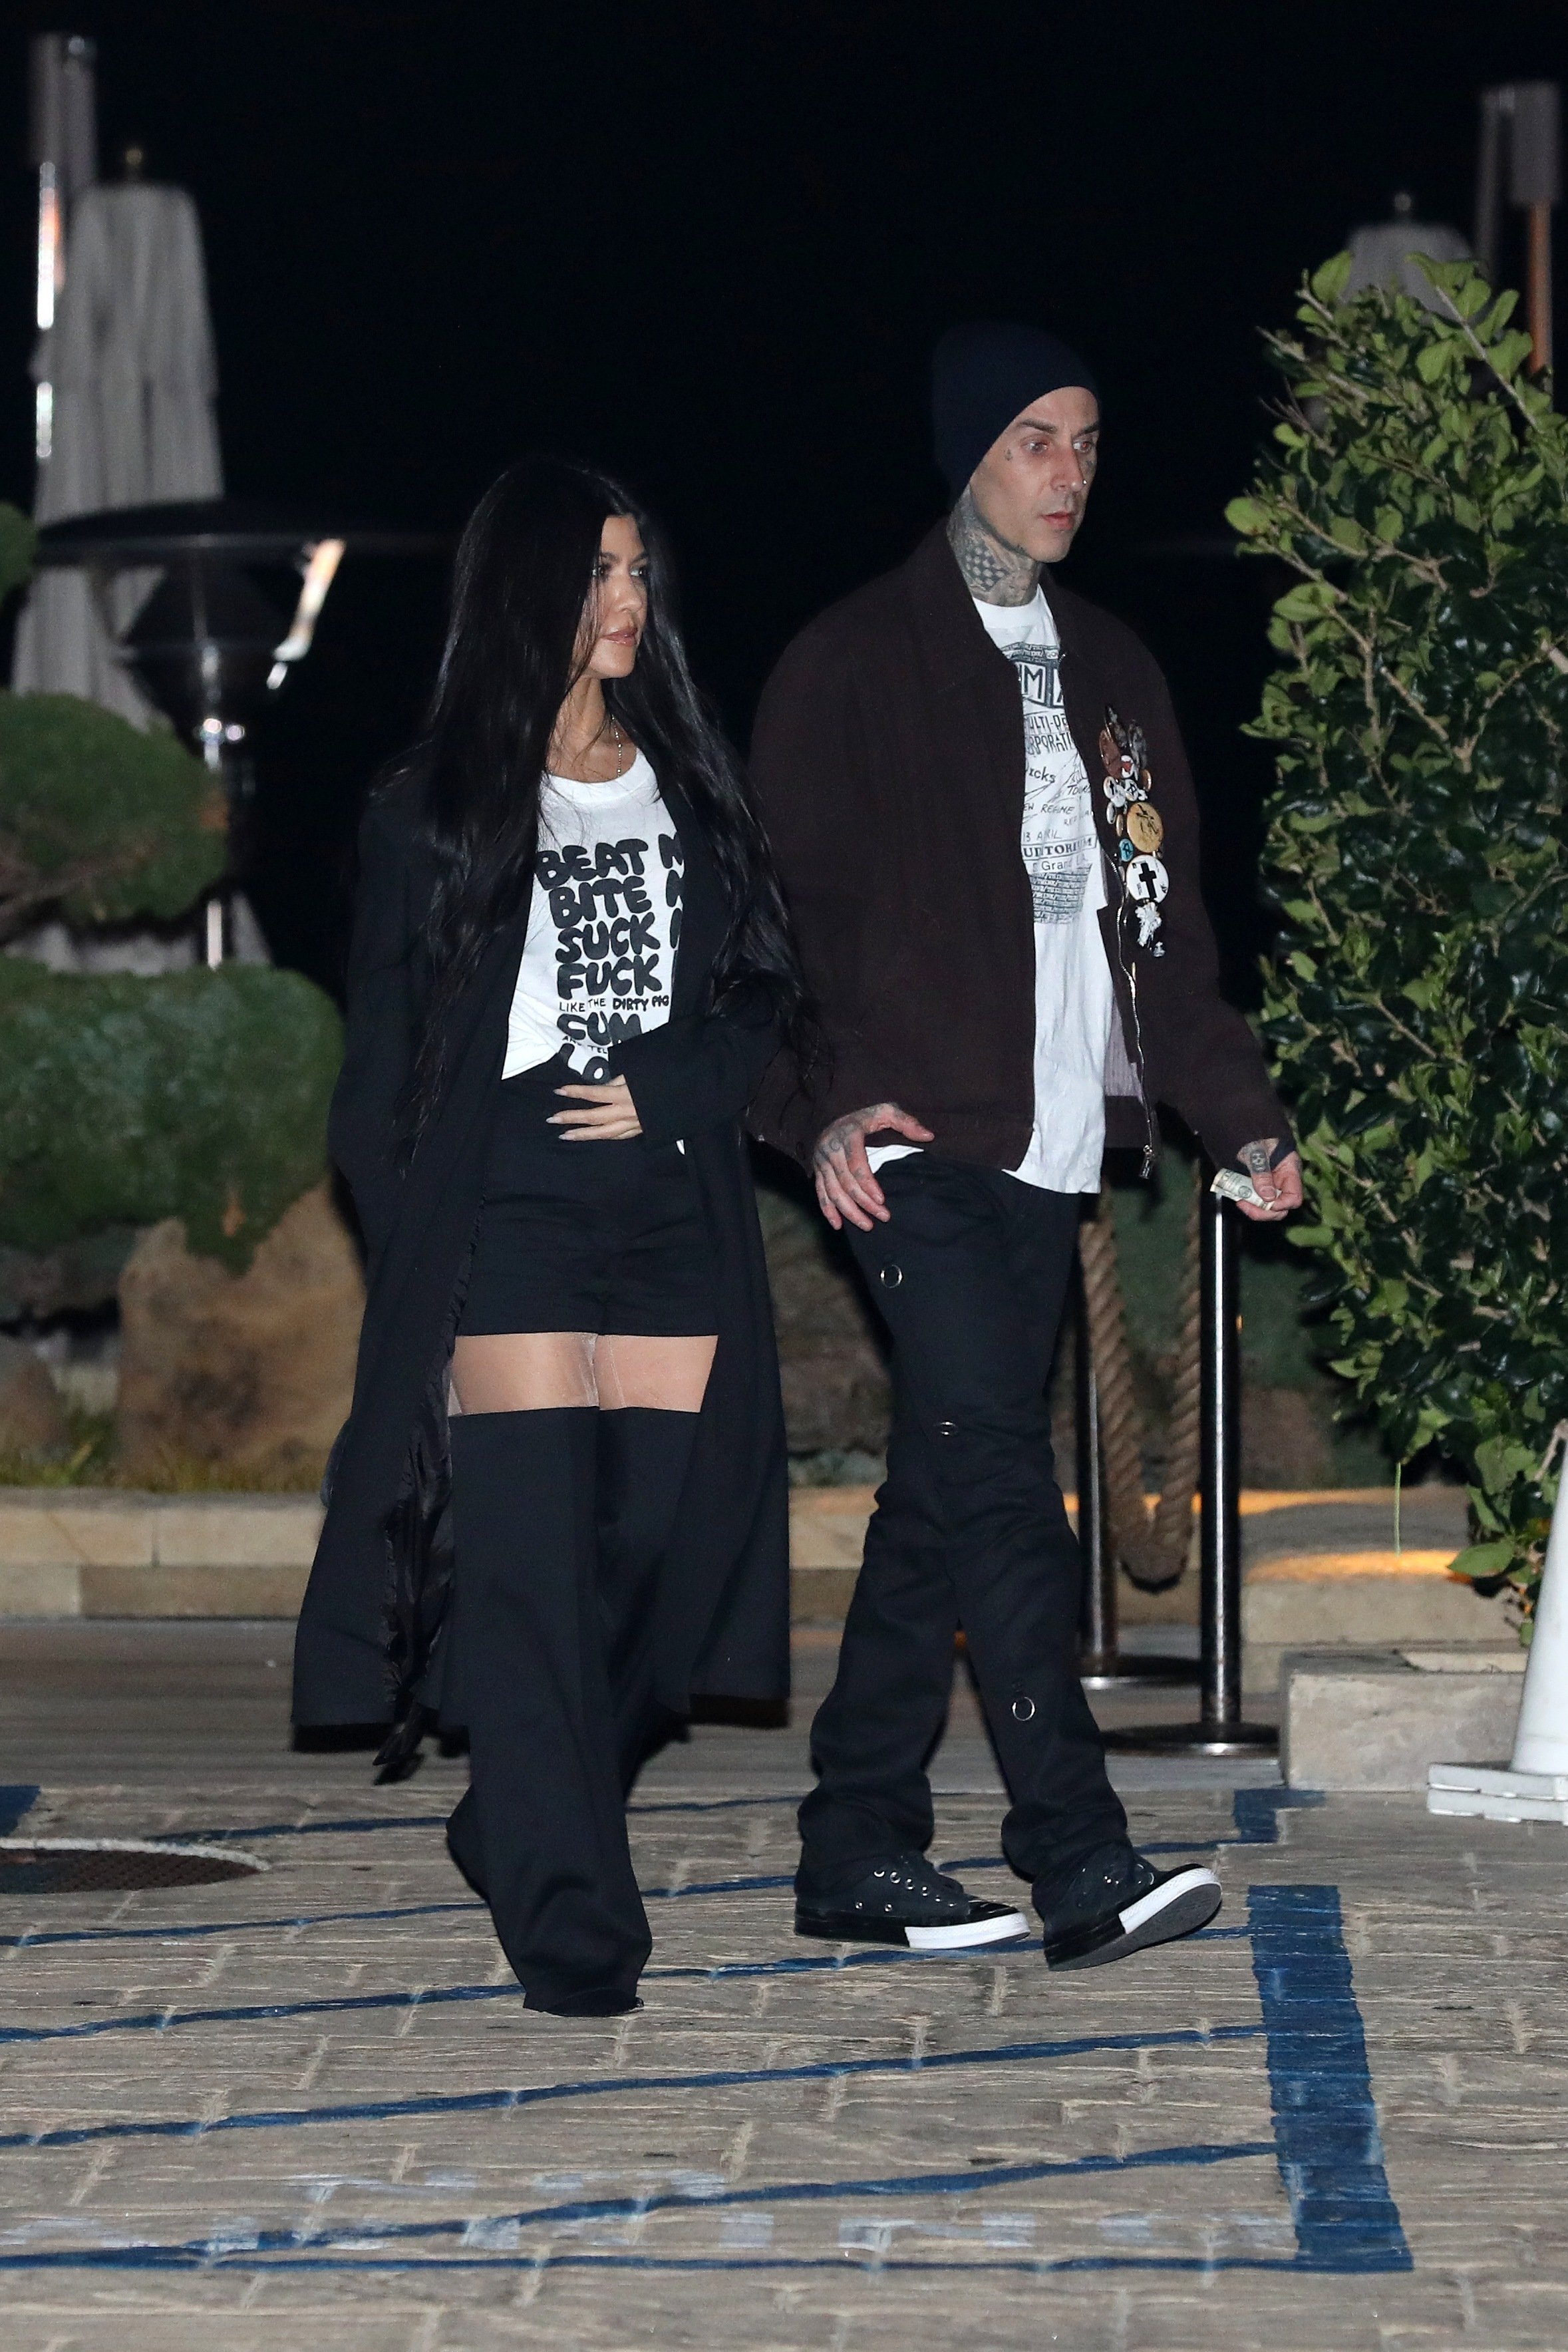 Kourtney Kardashian and Travis Barker pictured at Nobu on March 19, 2021 in Malibu, California. | Source: Getty Images